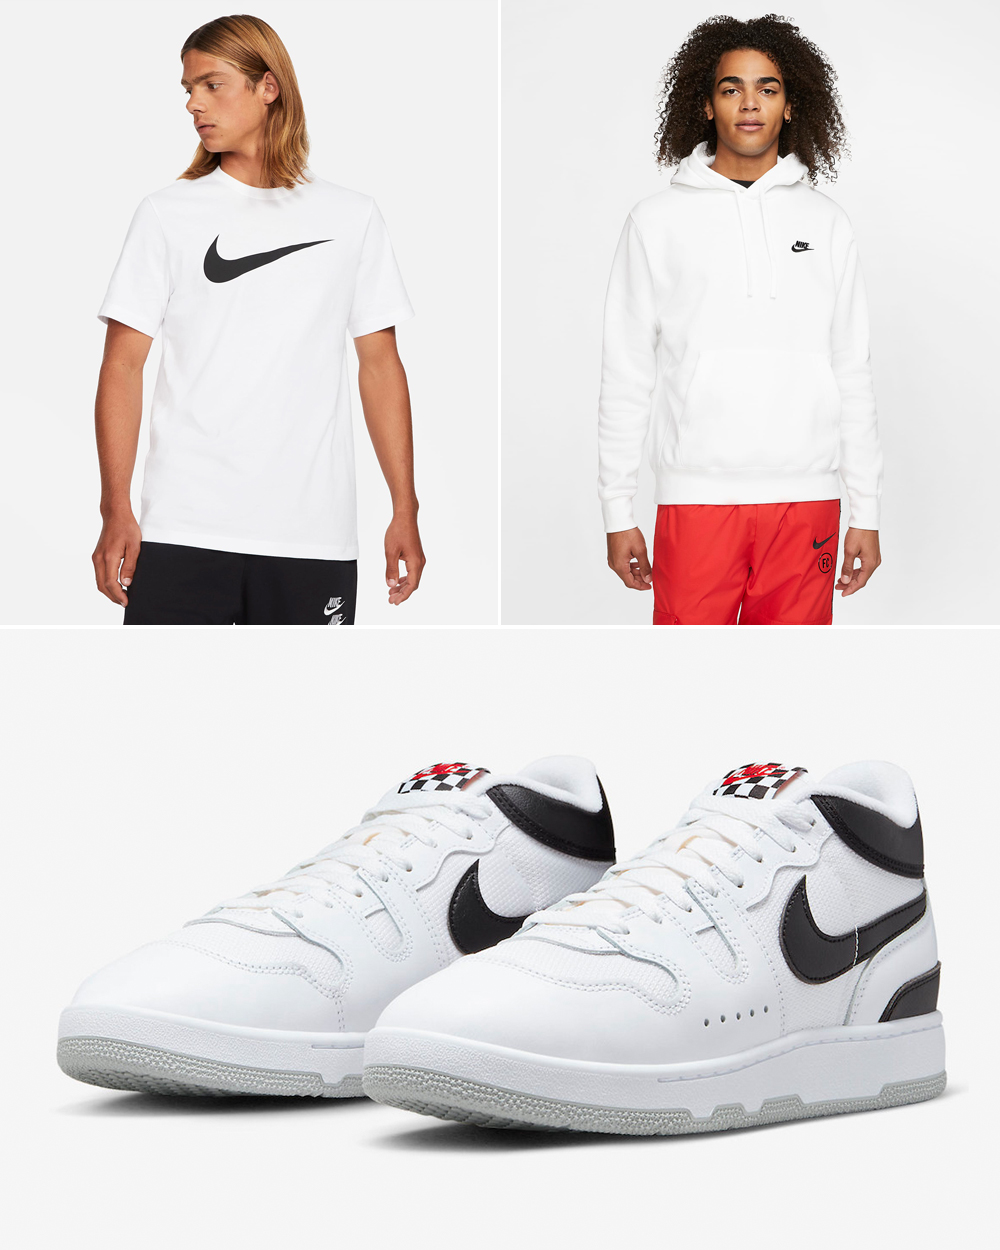 Nike-Mac-Attack-White-Black-Outfits